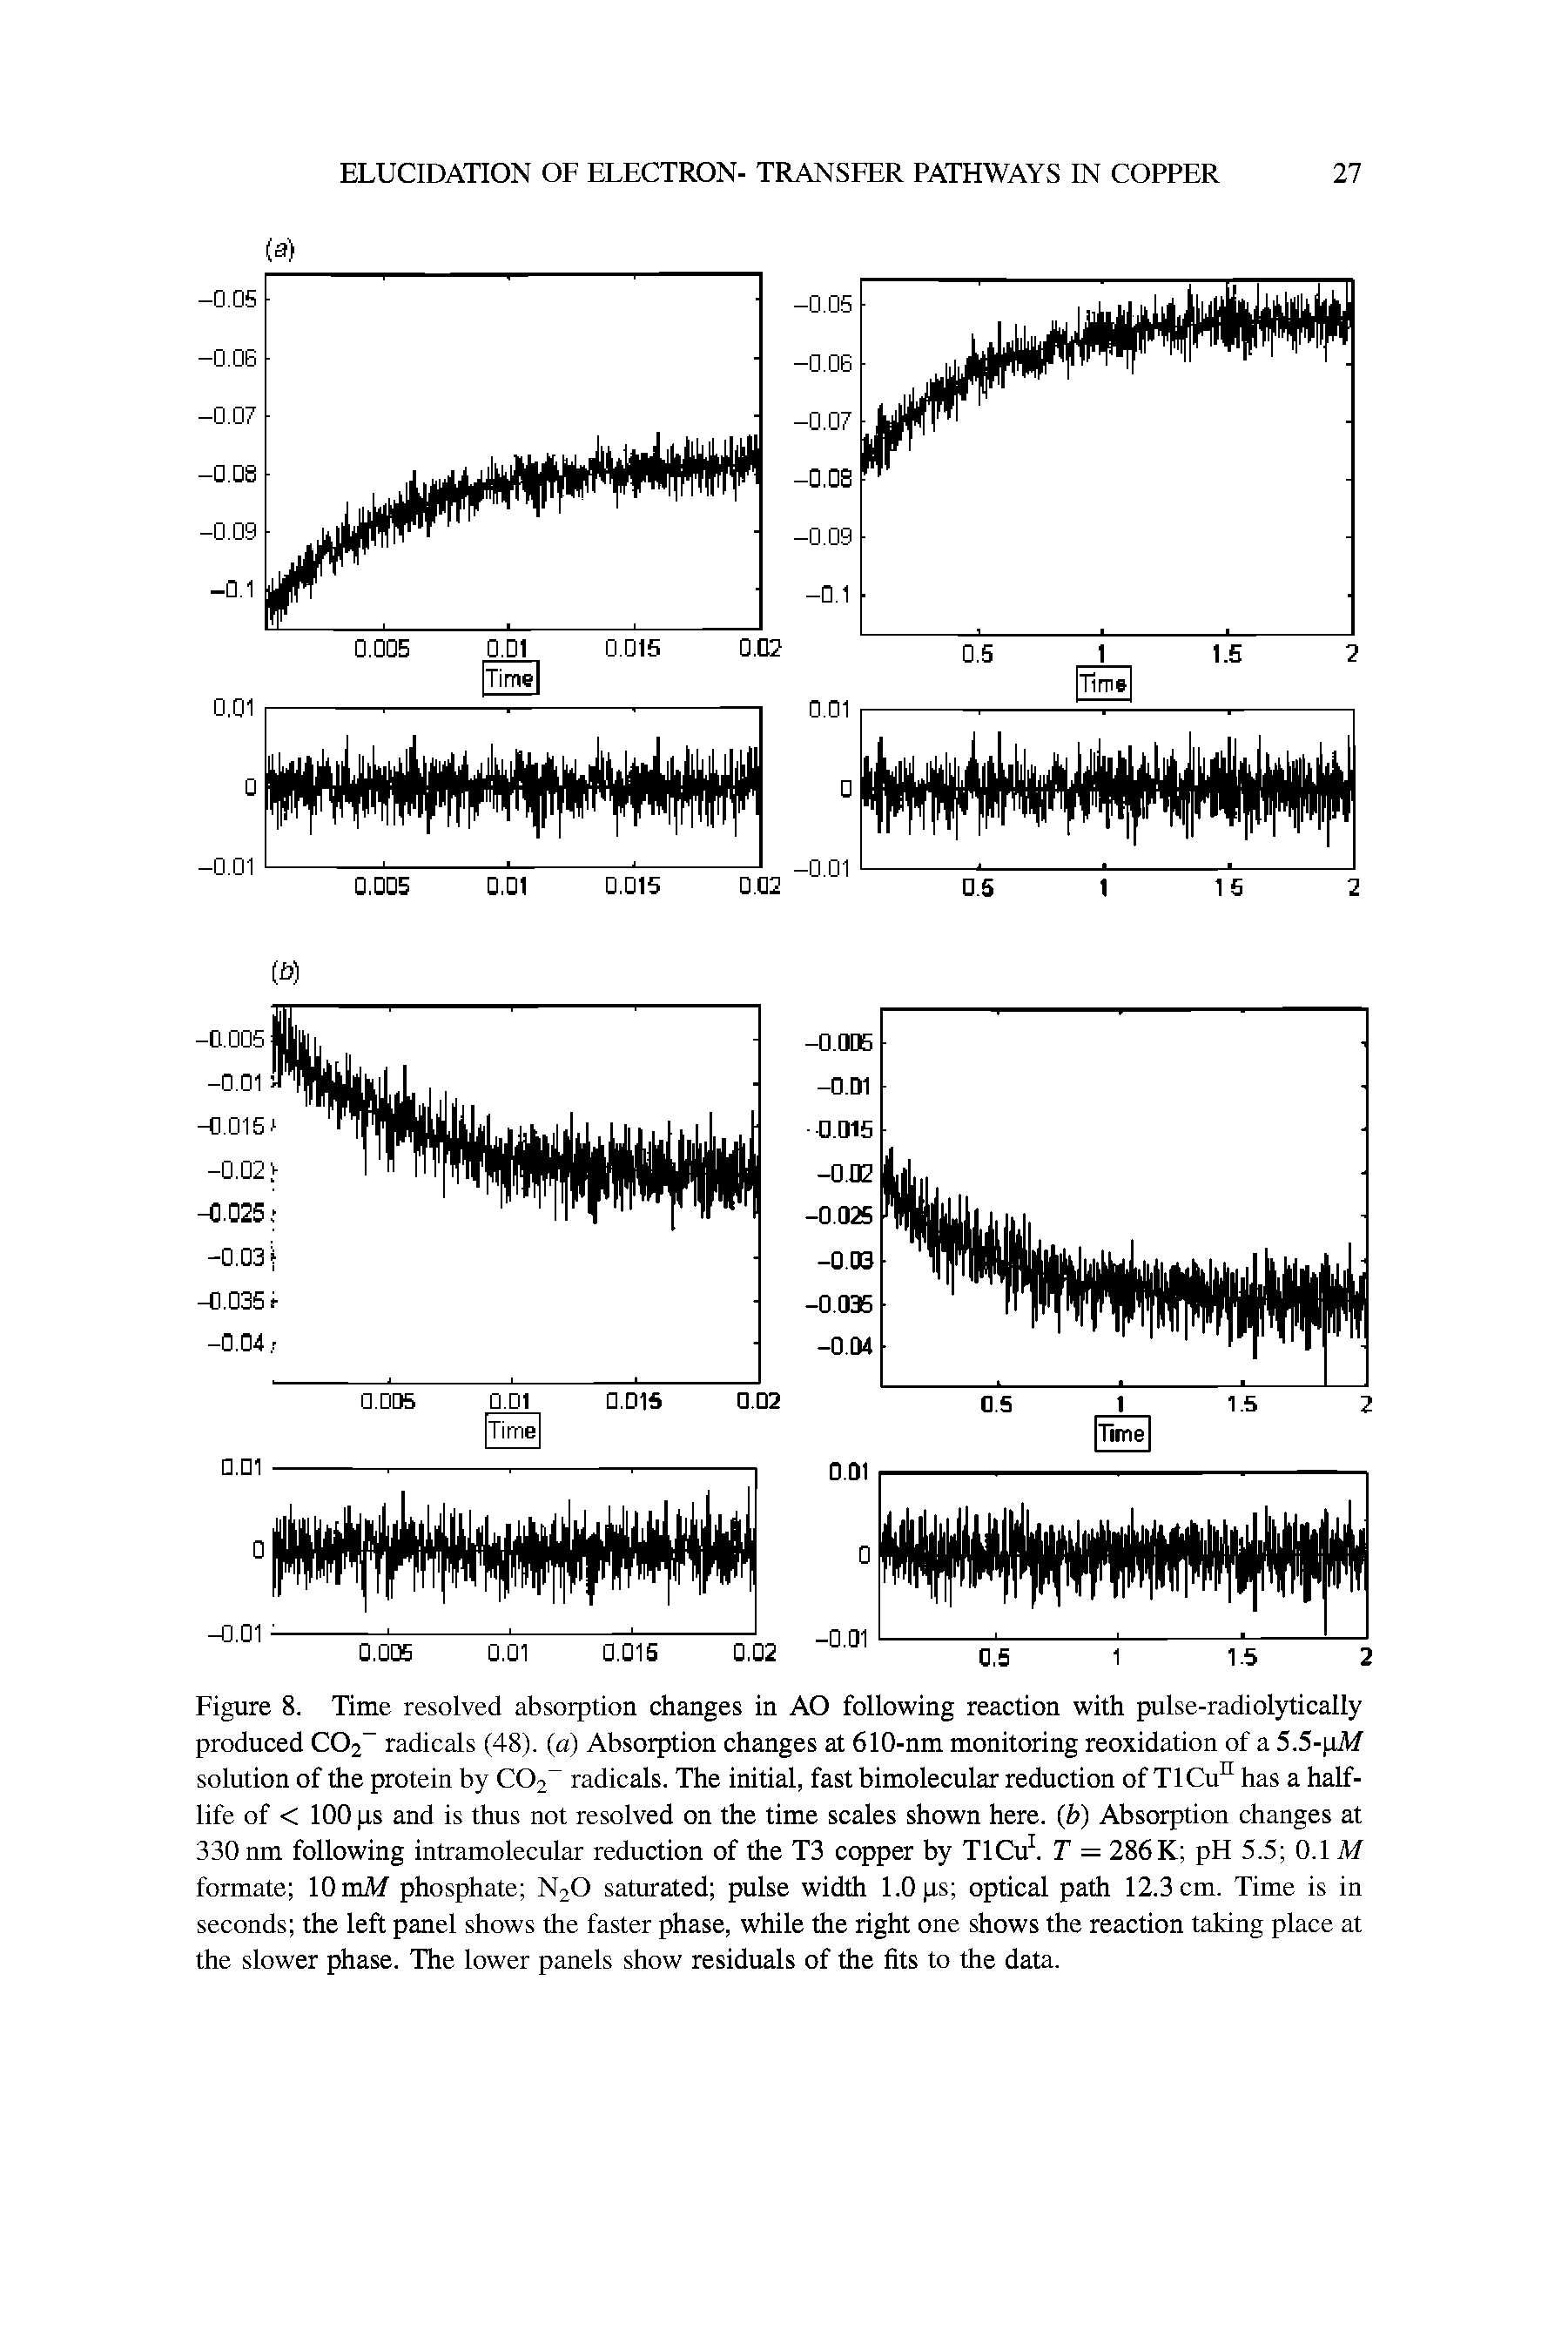 Figure 8. Time resolved absorption changes in AO following reaction with pulse-radiolytically produced C02 radicals (48). (a) Absorption changes at 610-nm monitoring reoxidation of a 5.5- xAf solution of the protein by C02 radicals. The initial, fast bimolecular reduction of T1 Cu° has a half-life of < 100 ps and is thus not resolved on the time scales shown here, (b) Absorption changes at 330 nm following intramolecular reduction of the T3 copper by TlCu. T = 286K pH 5.5 0.1 M formate lOmAf phosphate N2O saturated pulse width 1.0 ps optical path 12.3 cm. Time is in seconds the left panel shows the faster phase, while the right one shows the reaction taking place at the slower phase. The lower panels show residuals of the fits to the data.